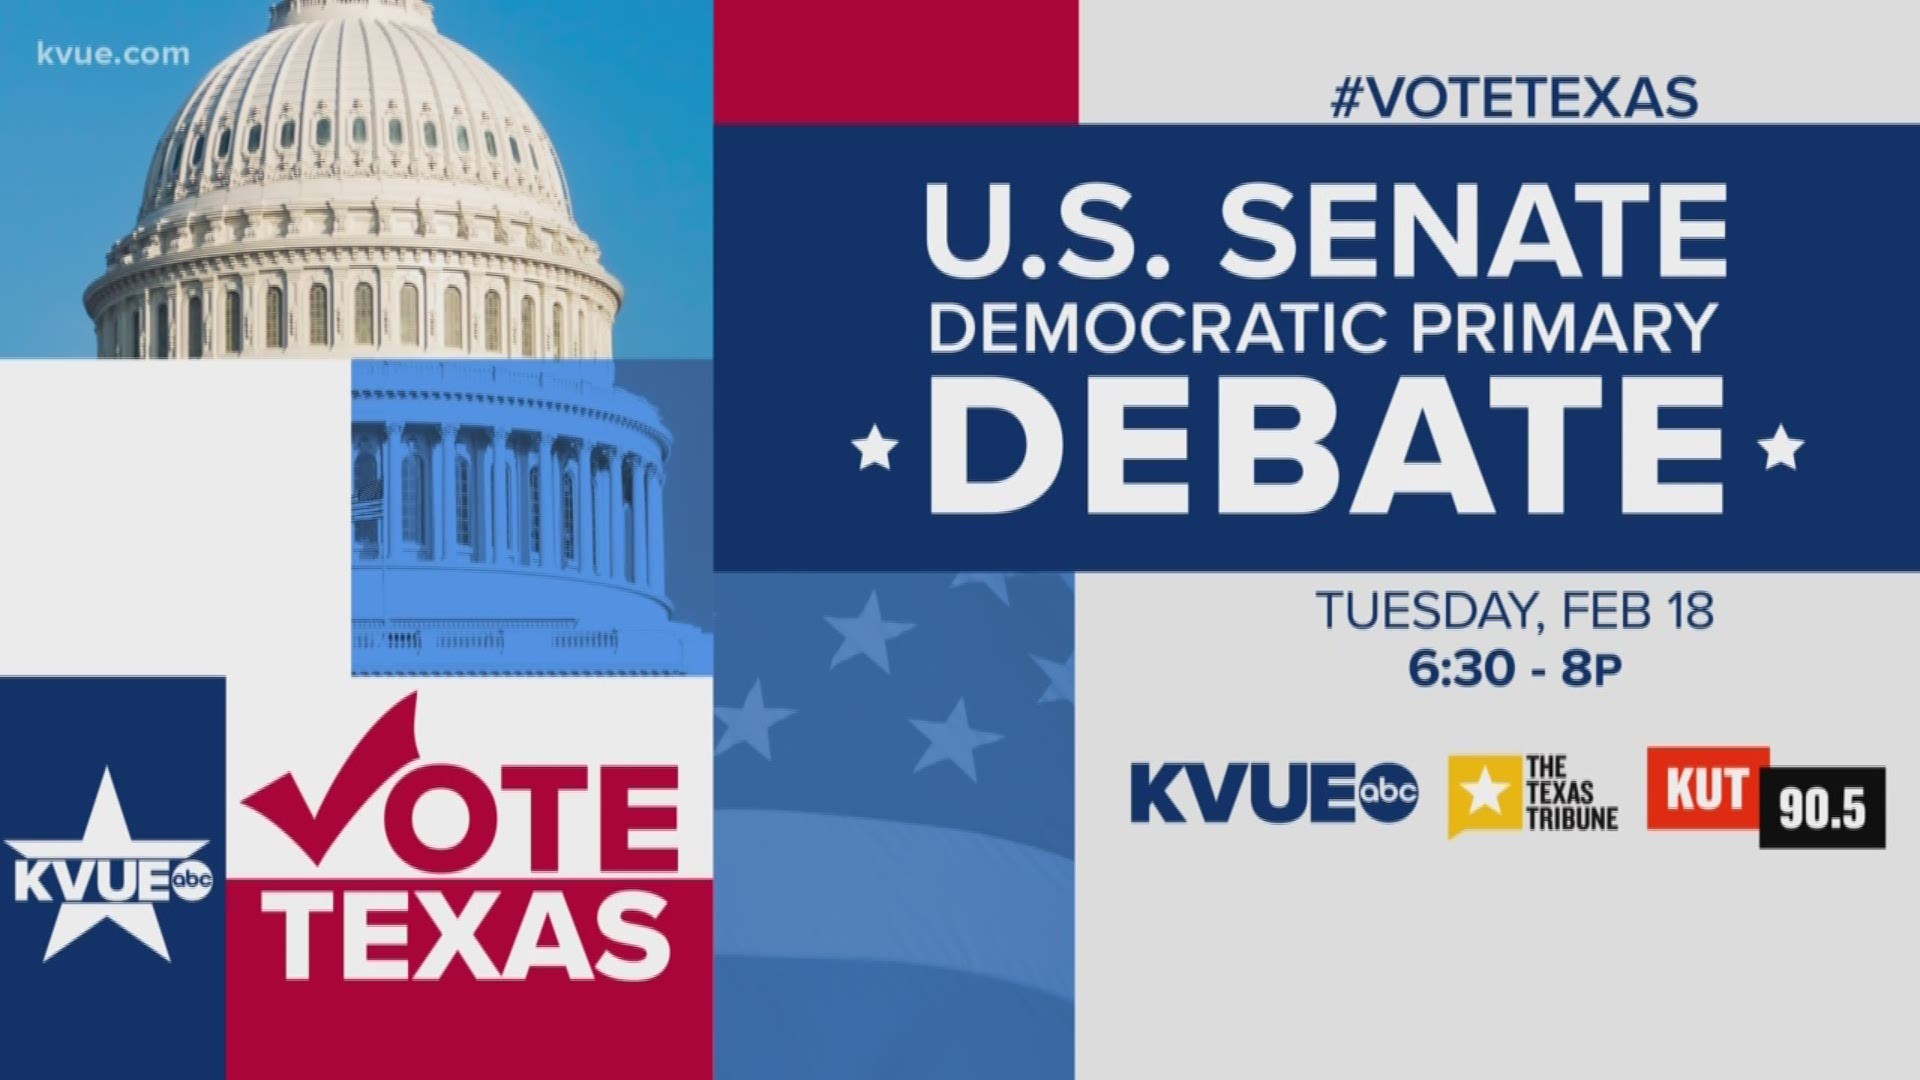 The debate will air on TV and on KVUE's digital and social platforms on Feb. 18.